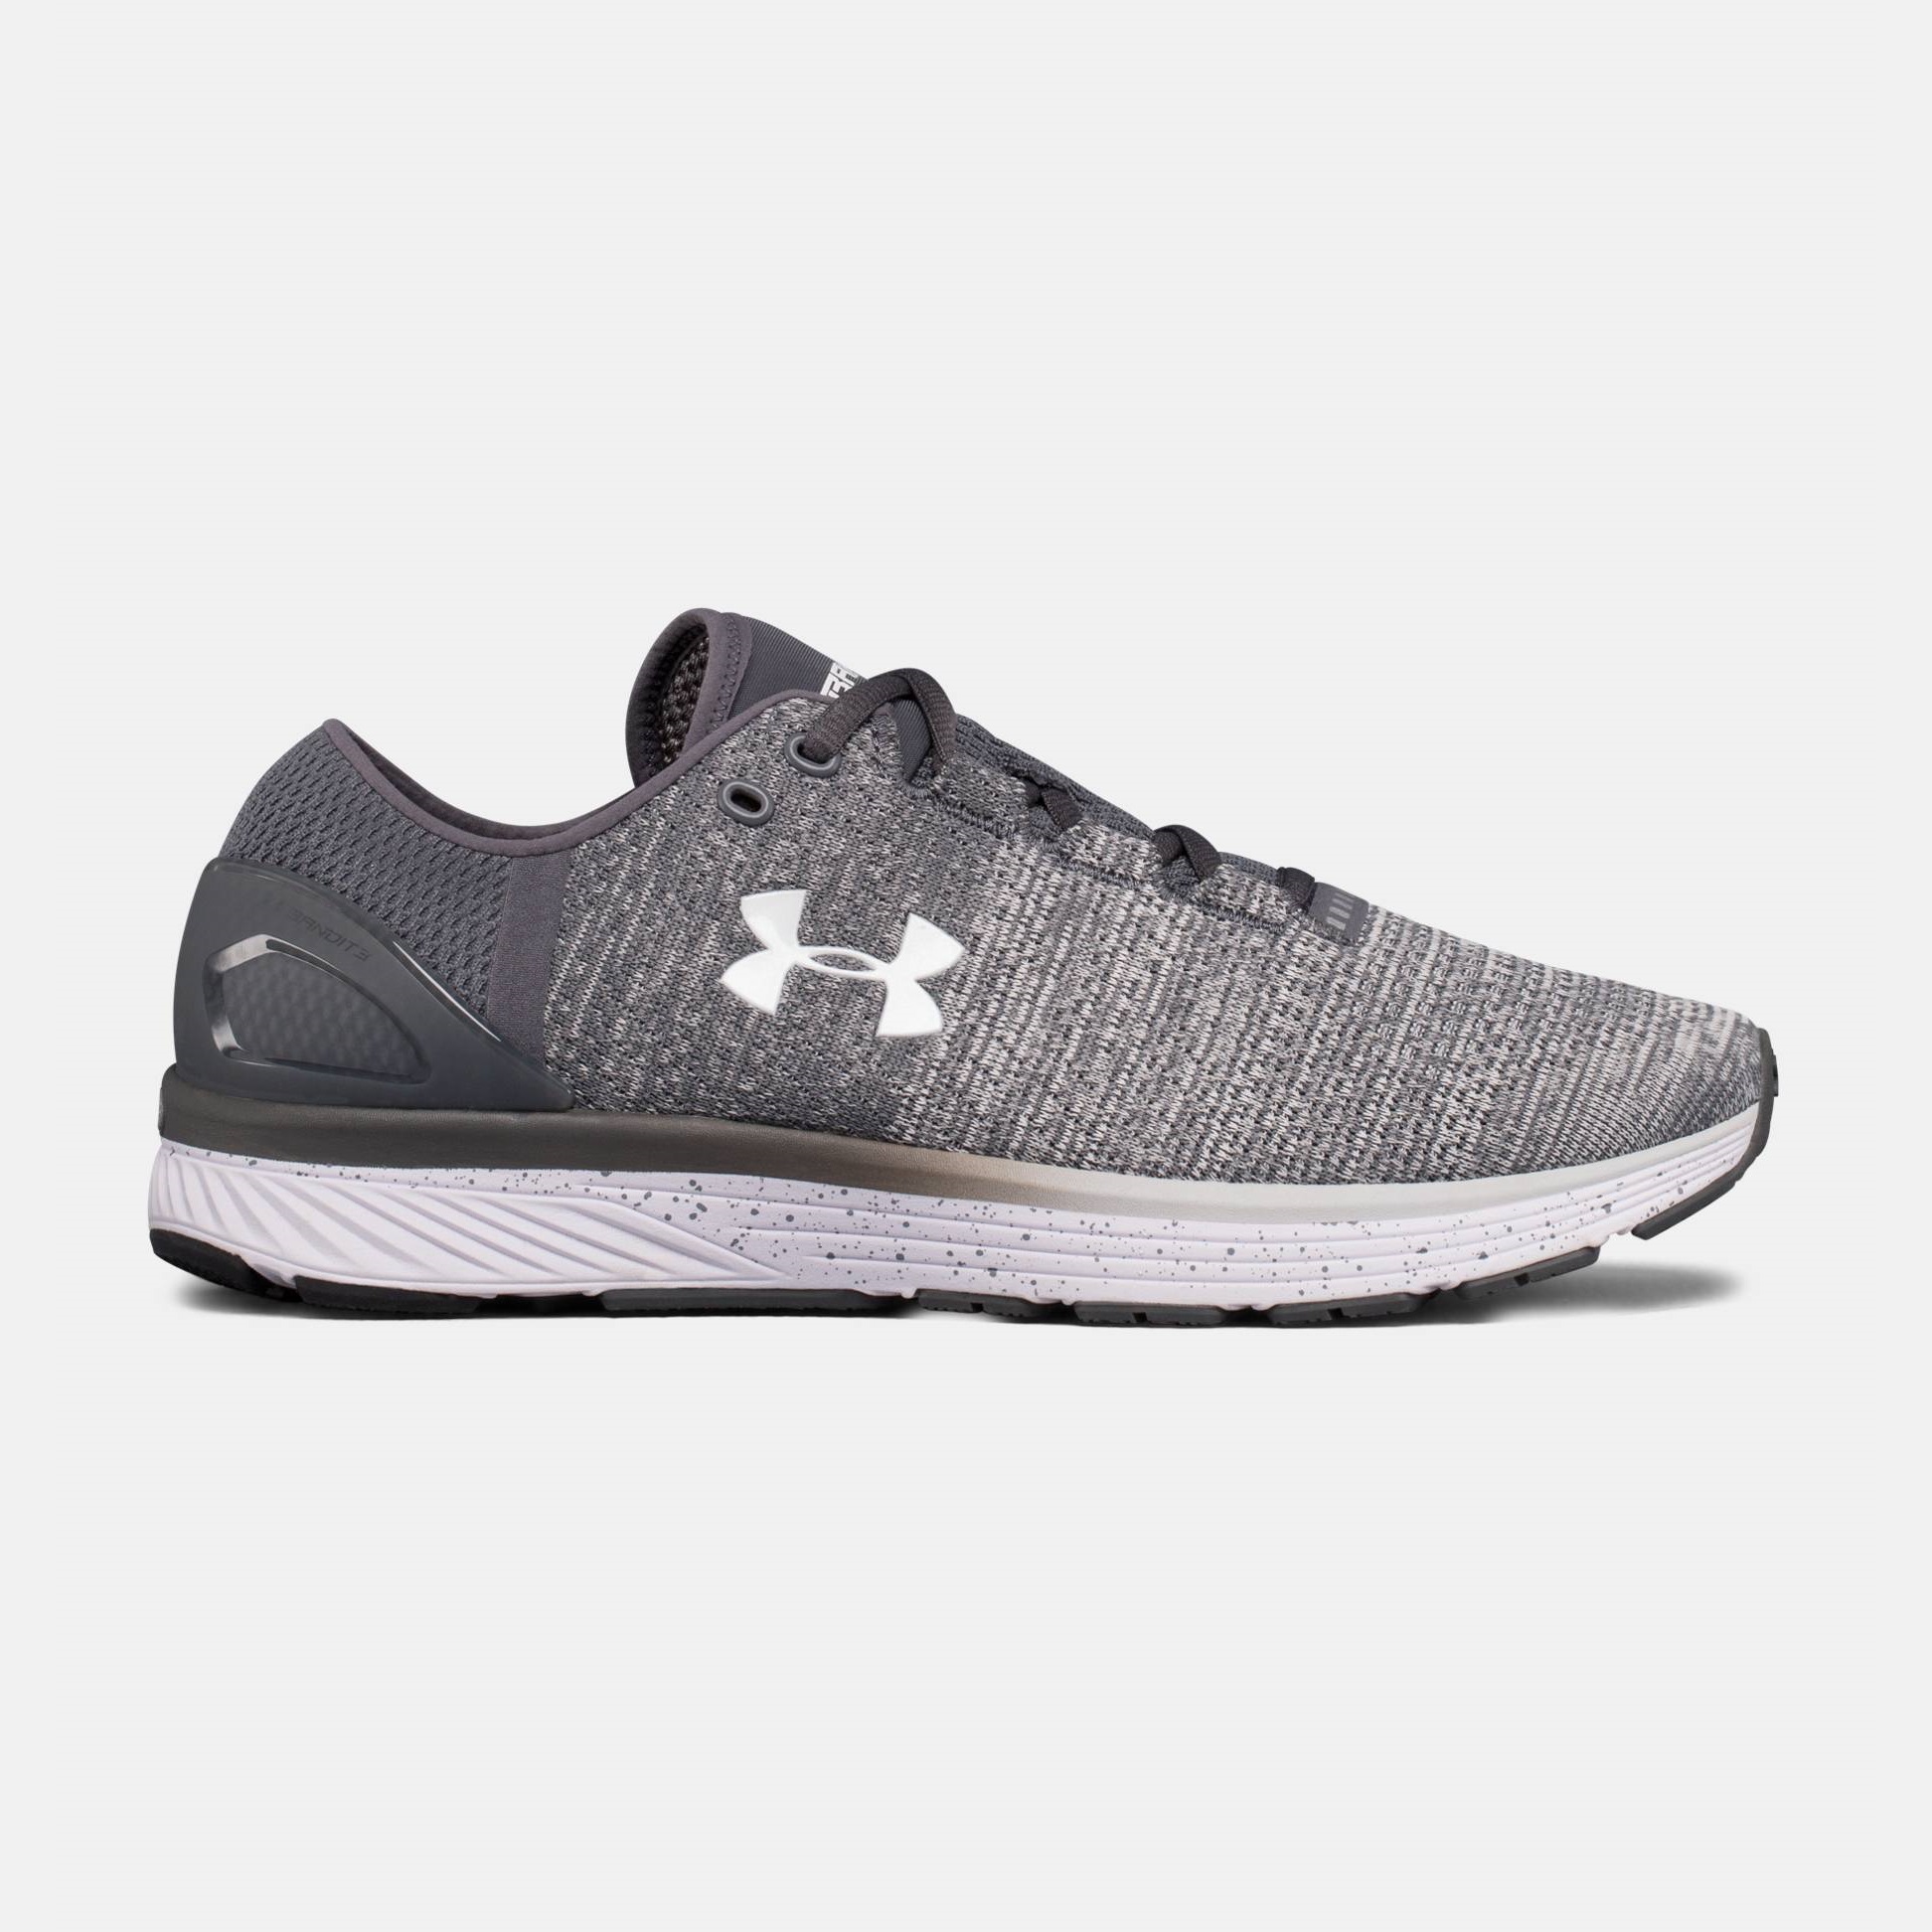 Voorkomen parachute Ontstaan Shoes | Under armour Charged Bandit 3 | Fitness